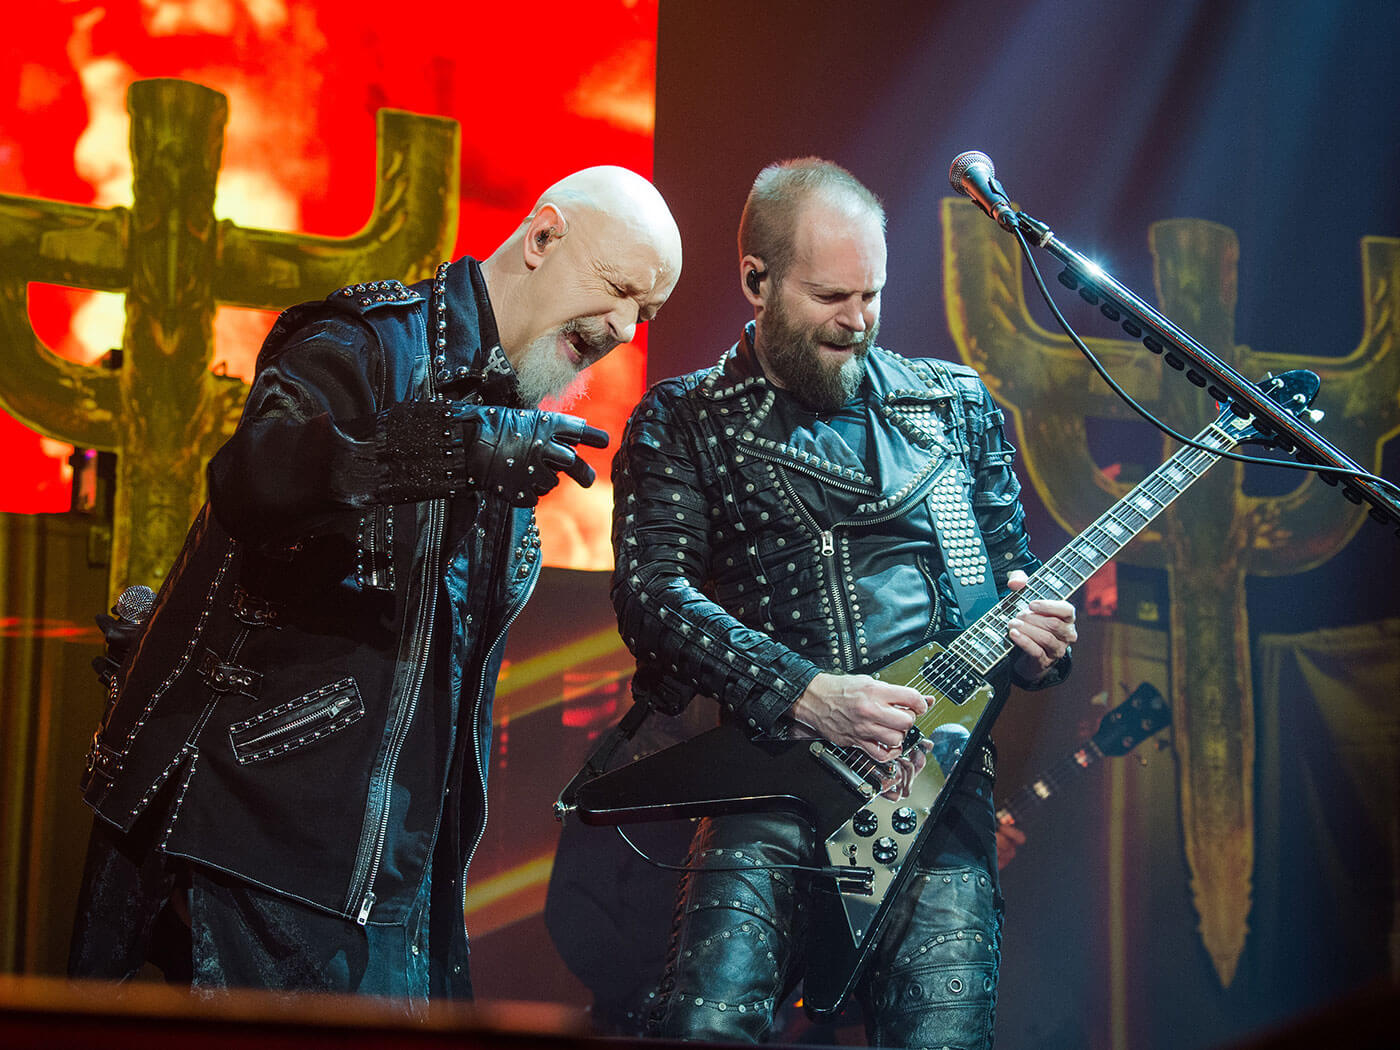 Rob Halford on stage with Judas Priest